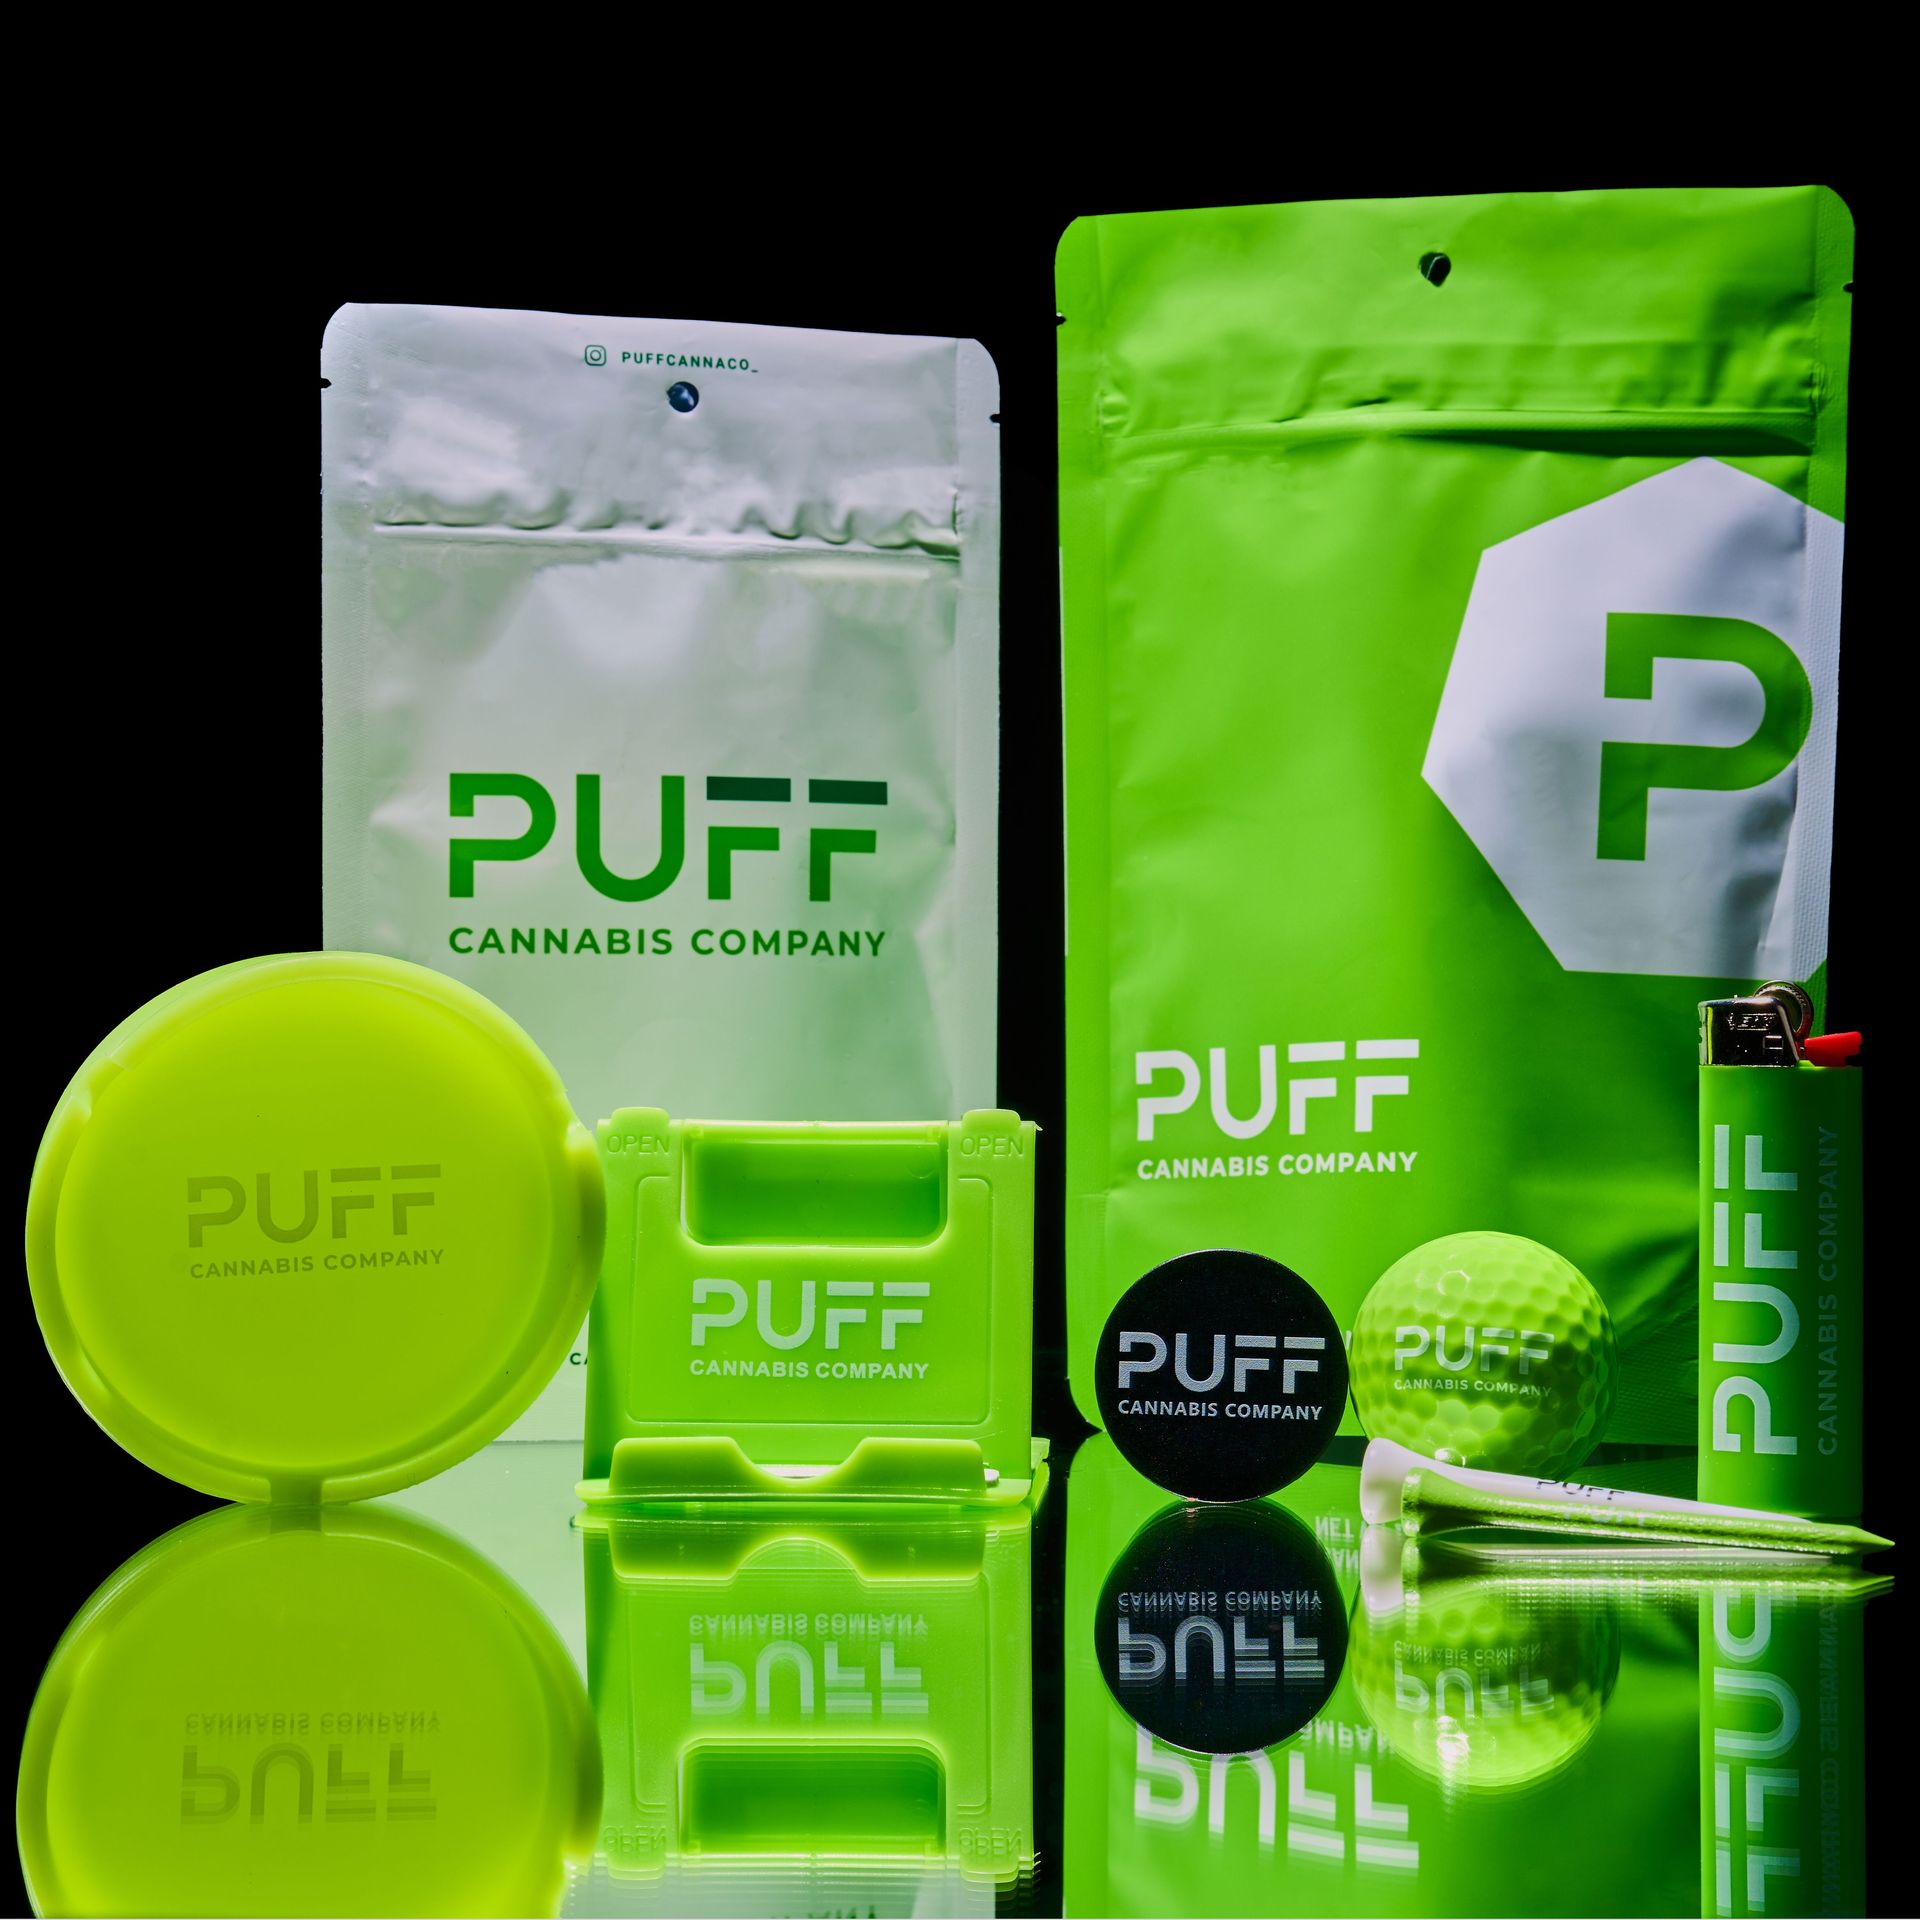 Puff cannabis branded items. Mylar bags, ashtray, phone stand, golf balls, lighter, and phone stand